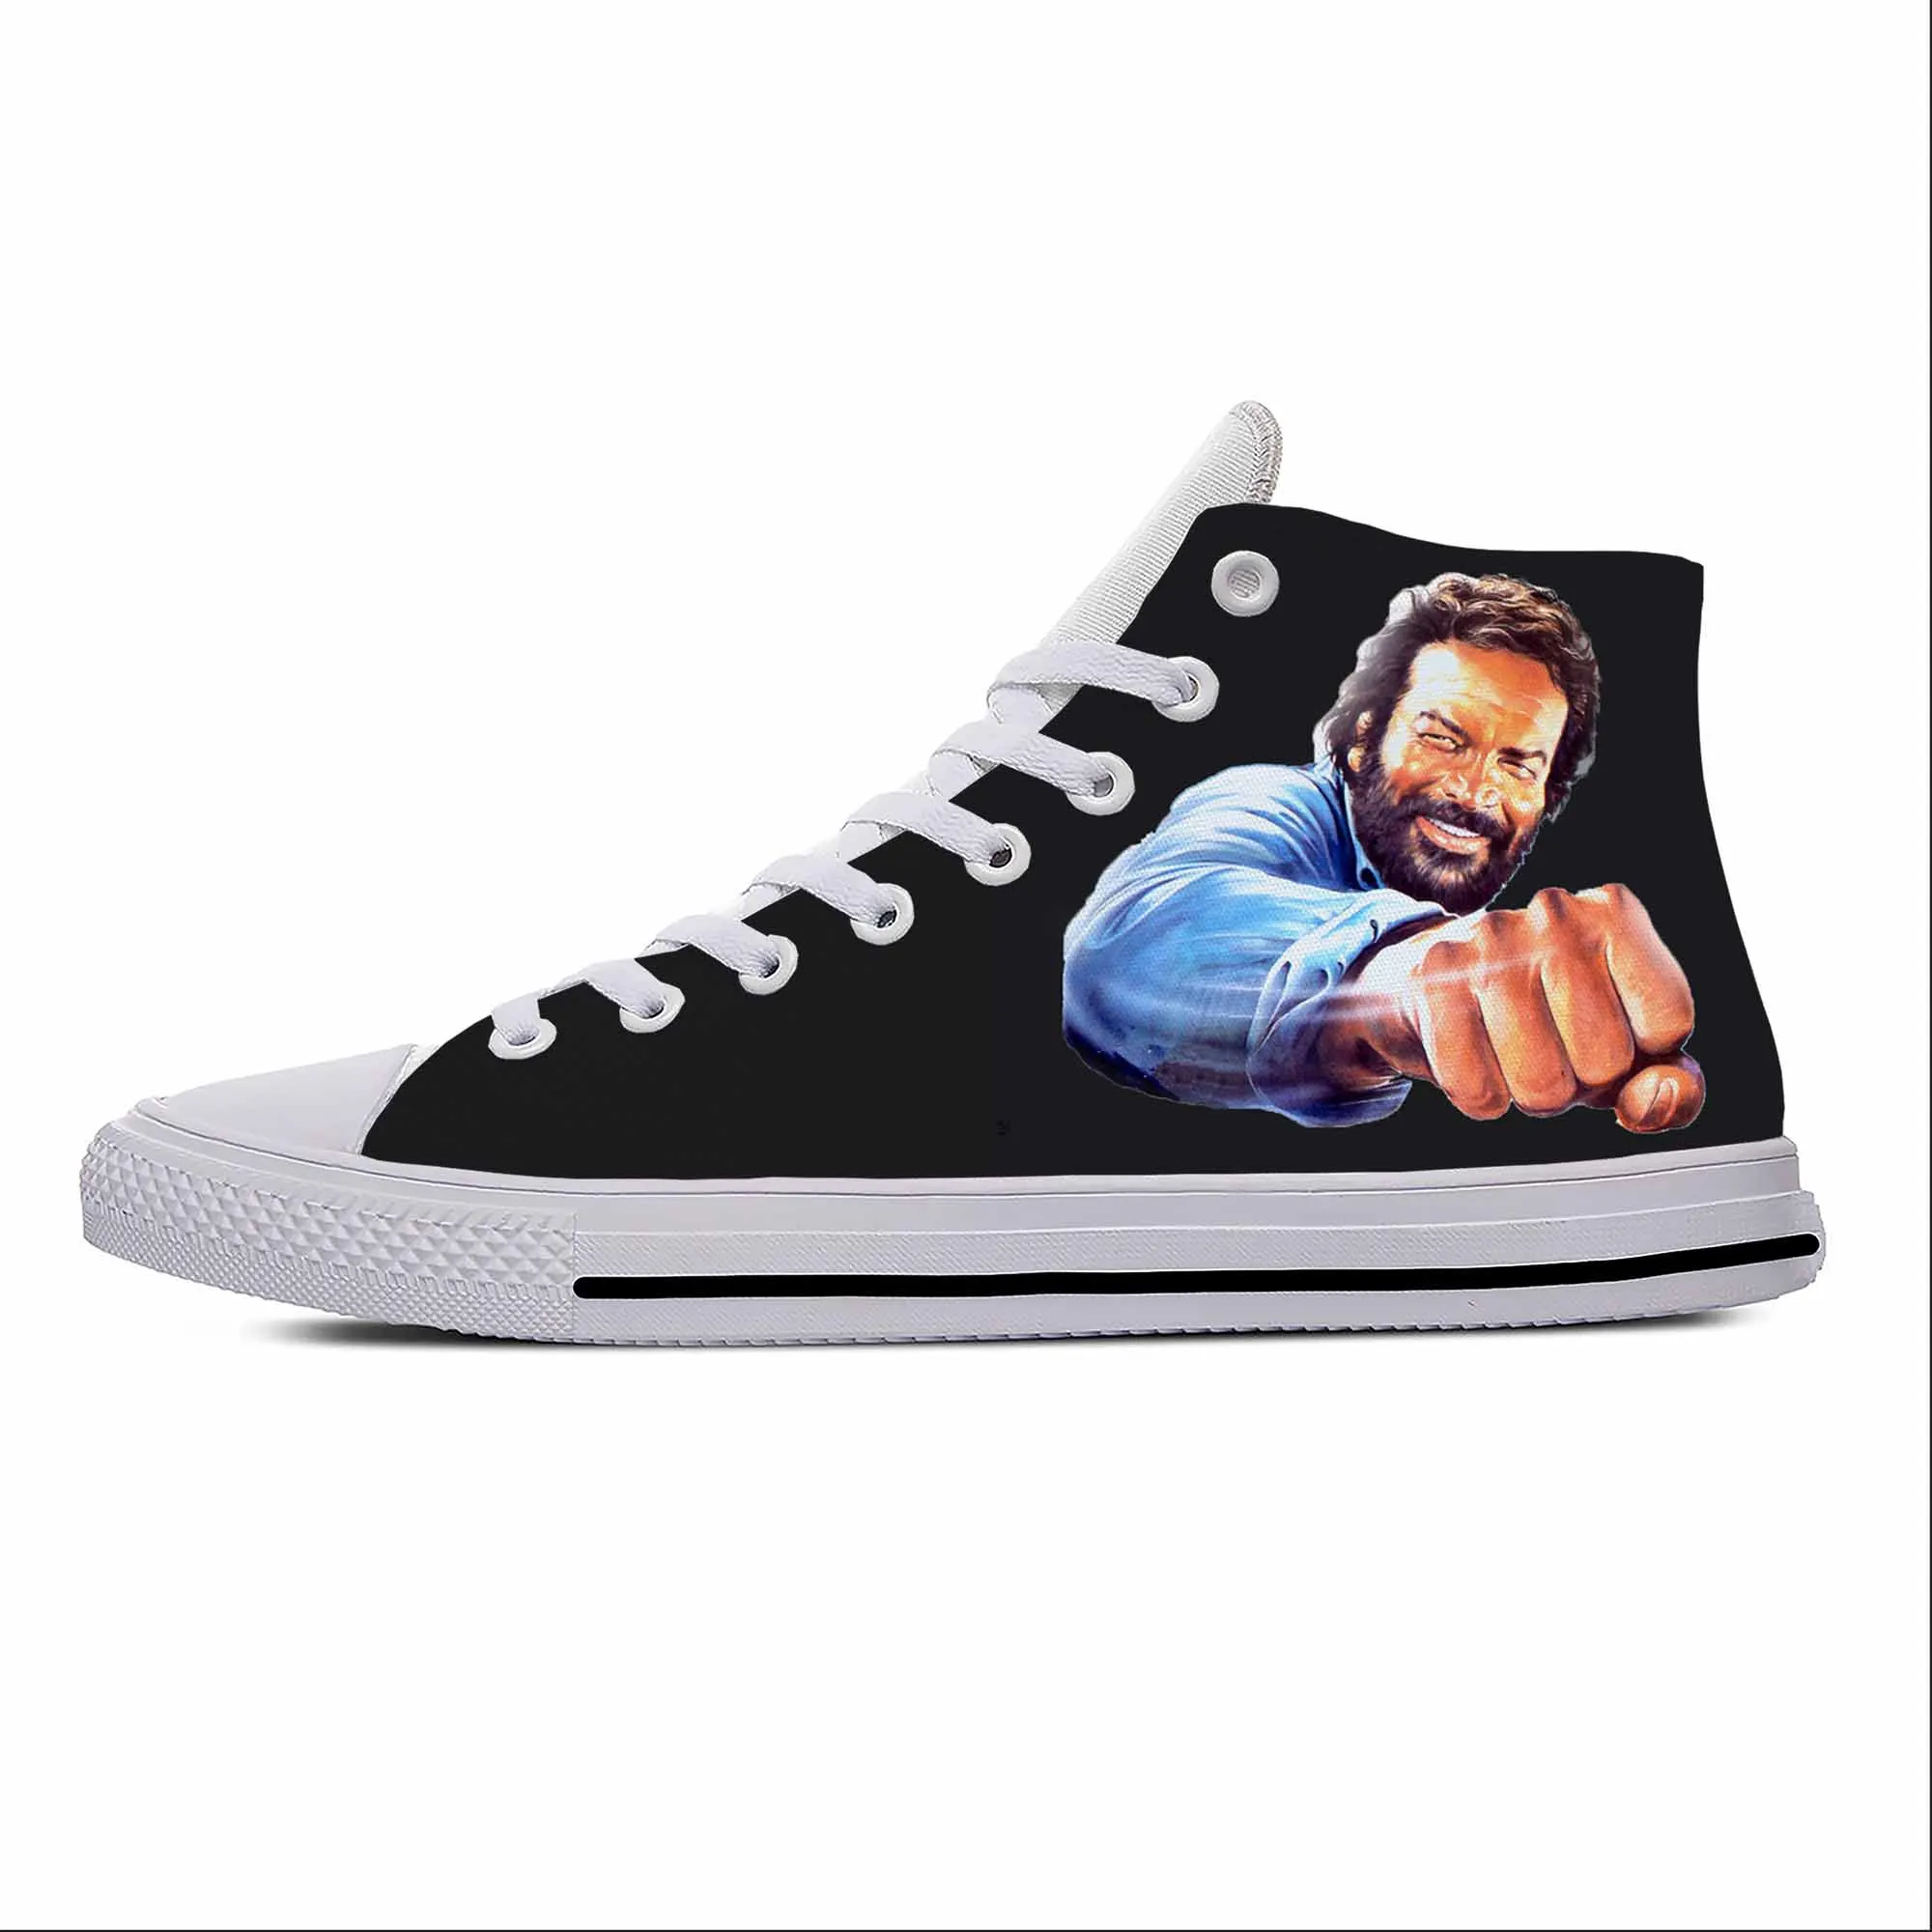 

Anime Cartoon Manga Movie Comic Funny Bud Spencer Casual Cloth Shoes High Top Lightweight Breathable 3D Print Men Women Sneakers